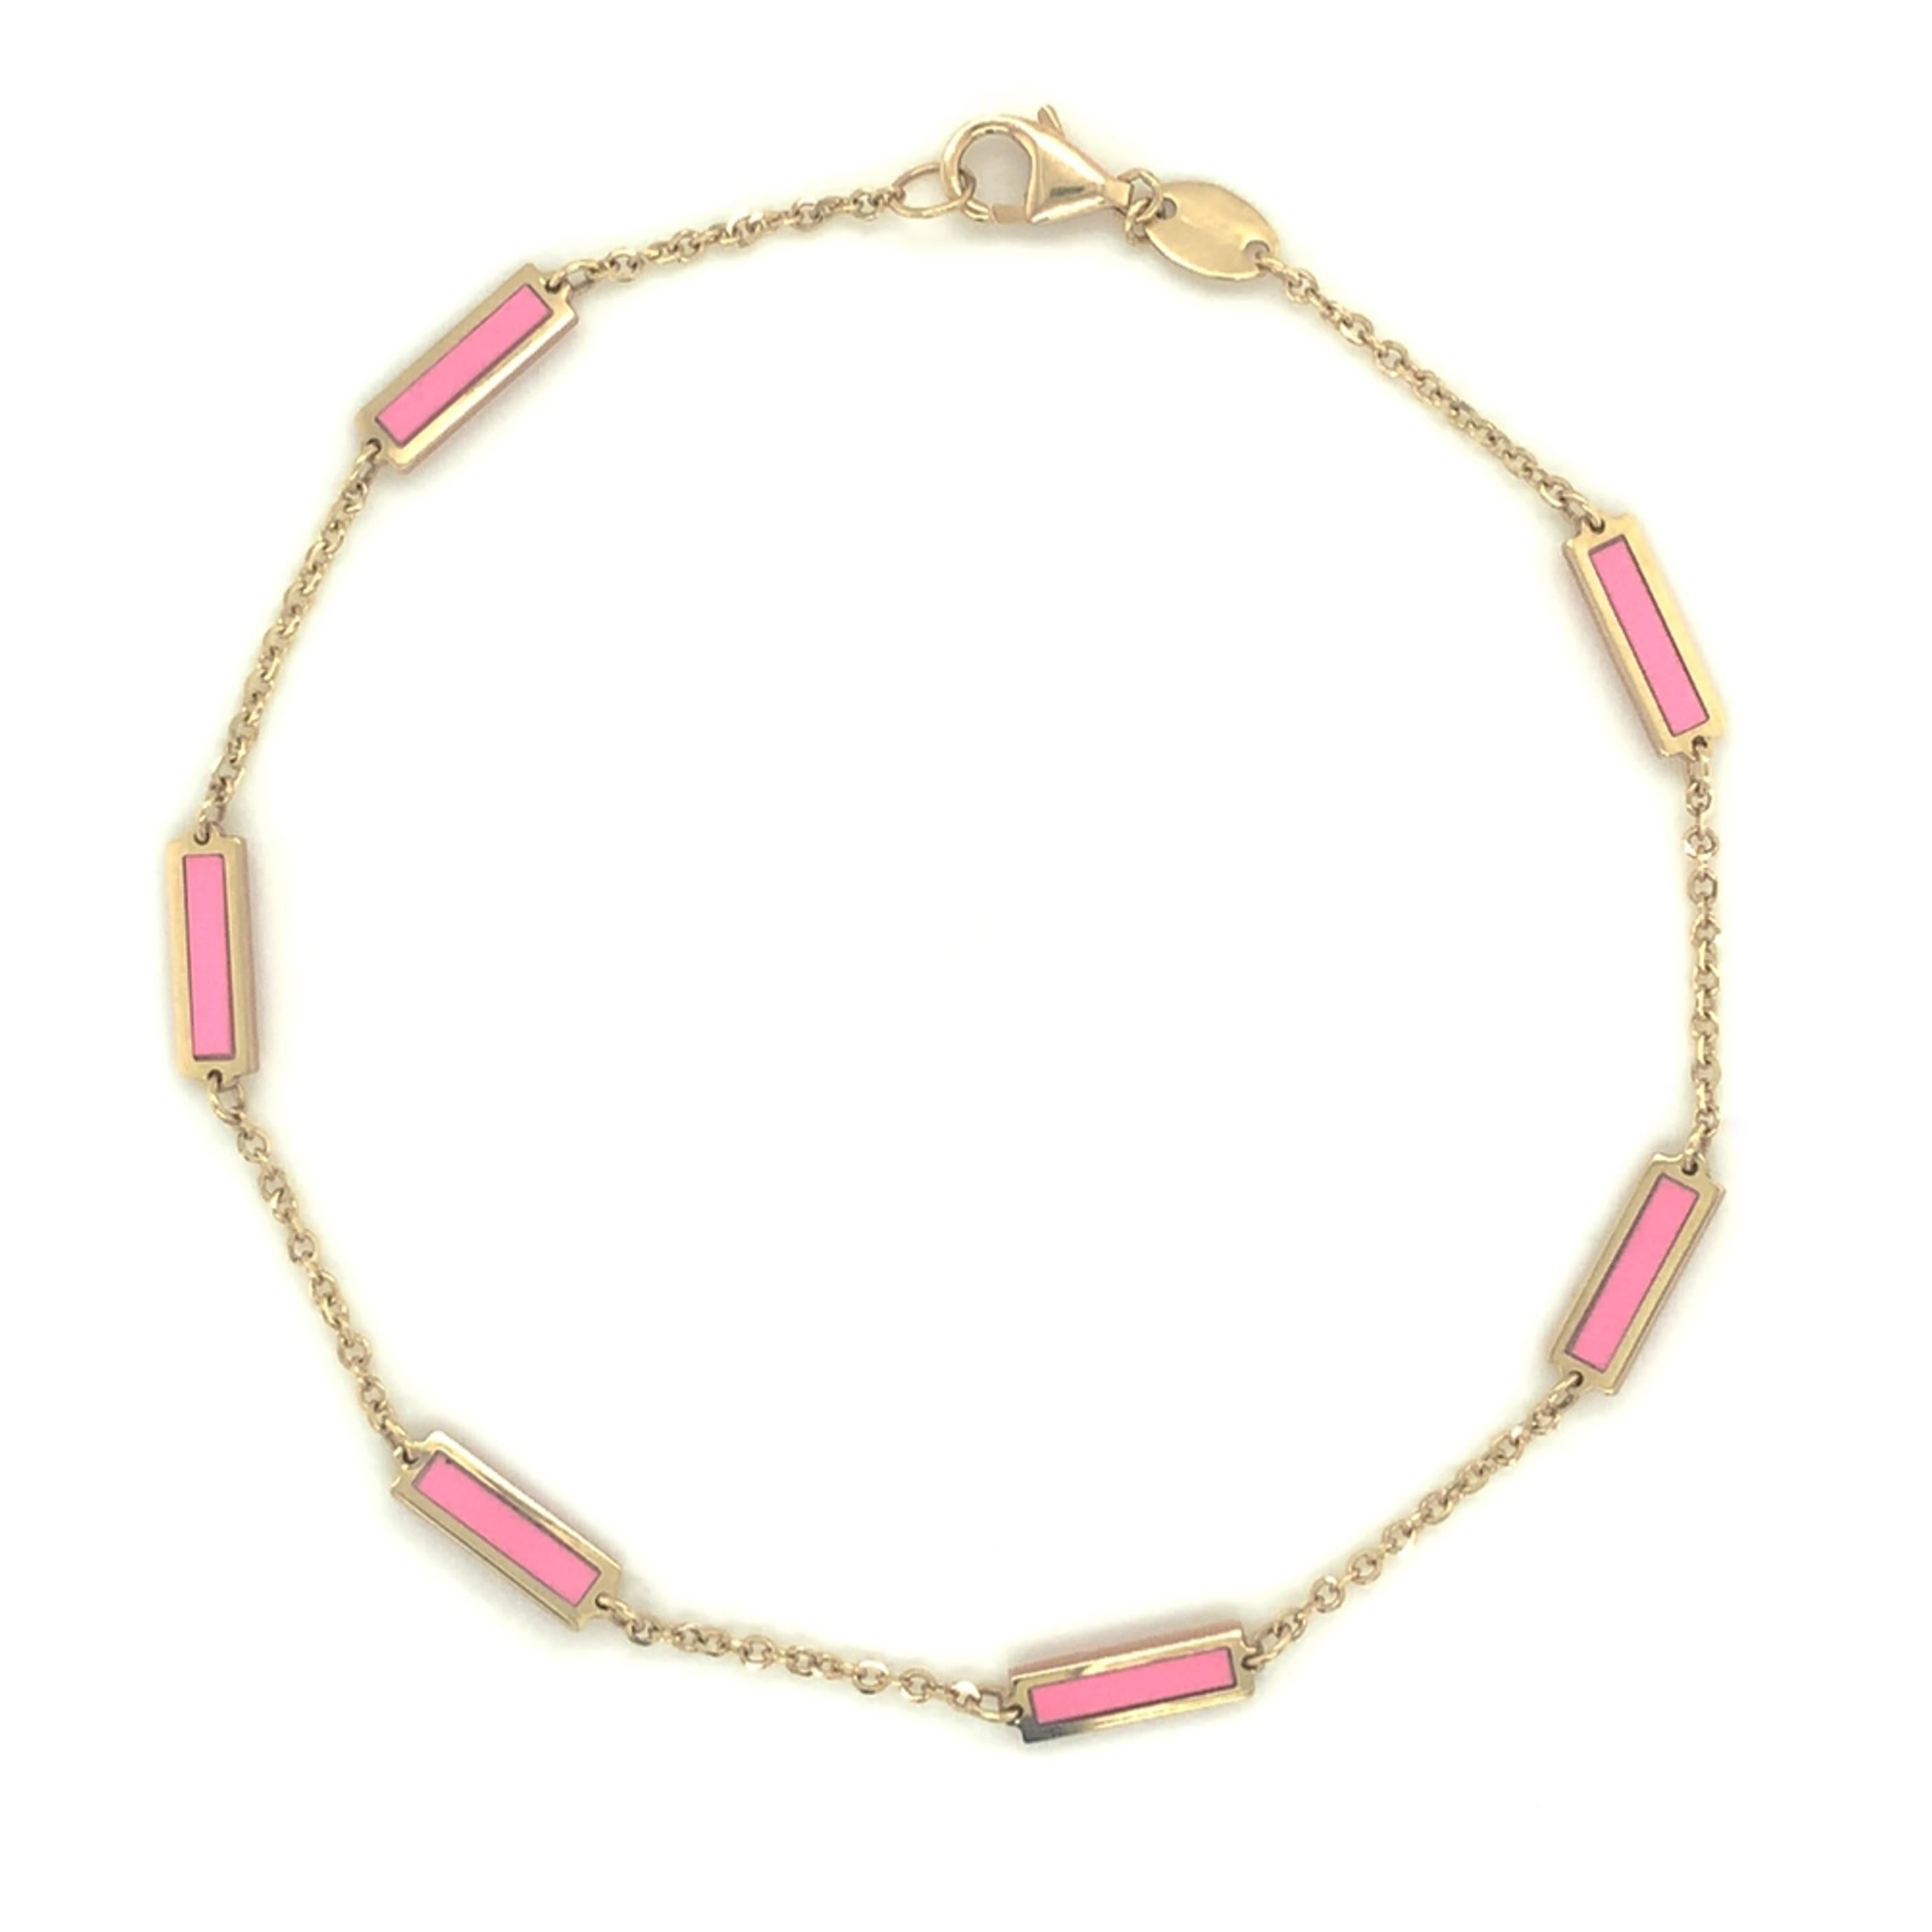 Quality Pink Agate Bar Bracelet: Focused on design and detail, these beautiful Pink Agate gemstone bracelet of your choice features a station bar design and is crafted of 14k yellow gold. Bracelet measurement is 7